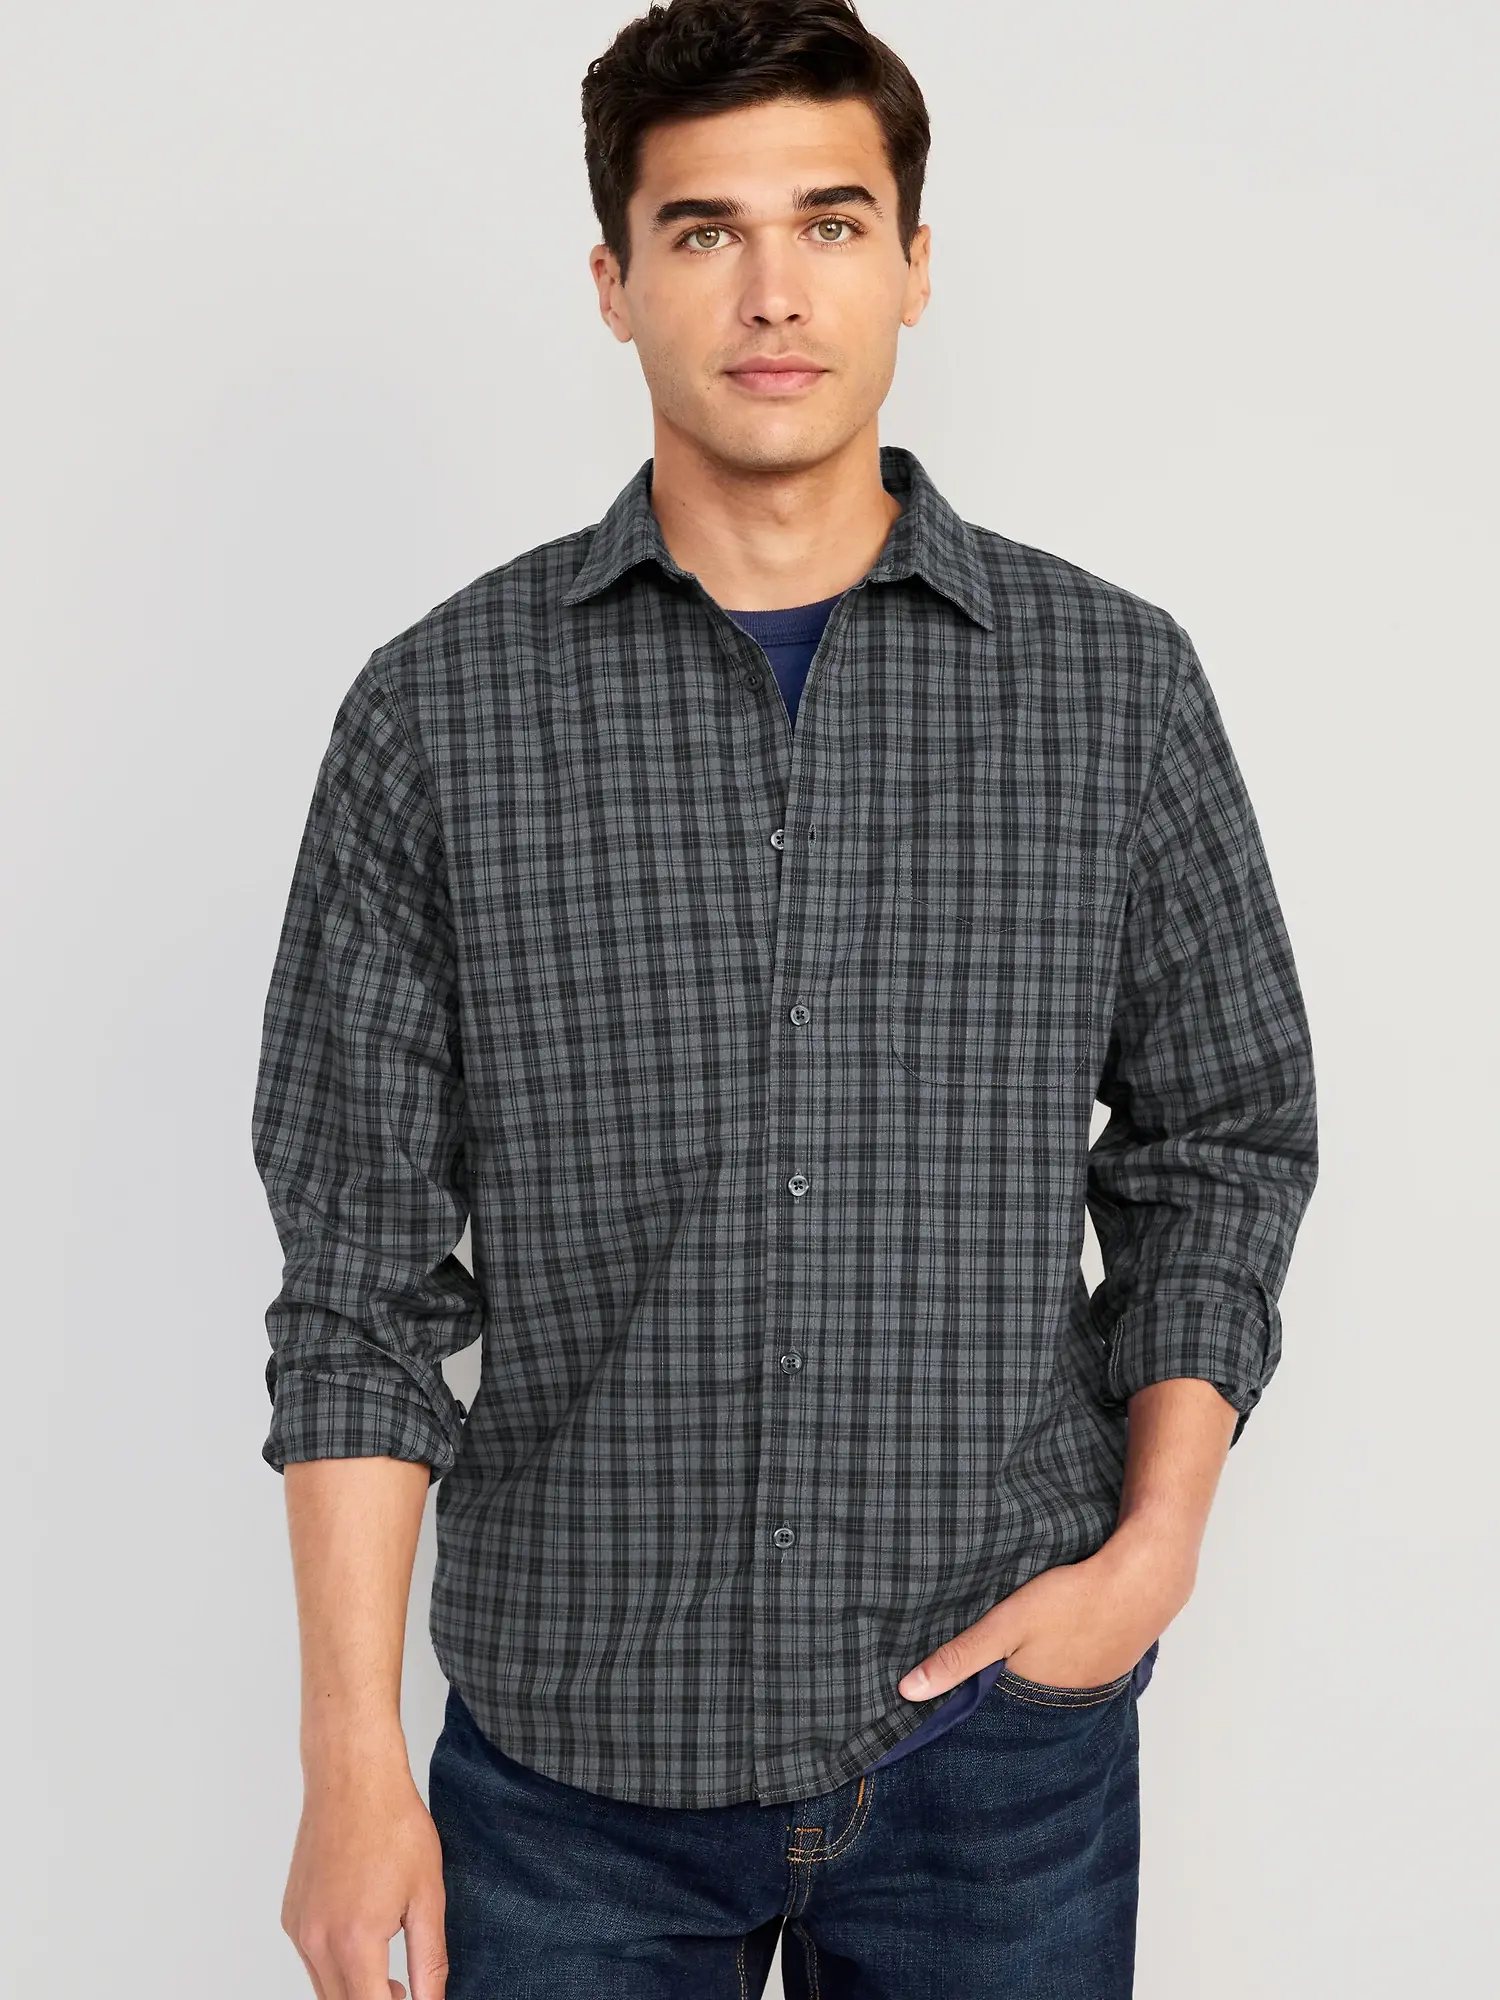 Old Navy Classic Fit Everyday Shirt gray. 1